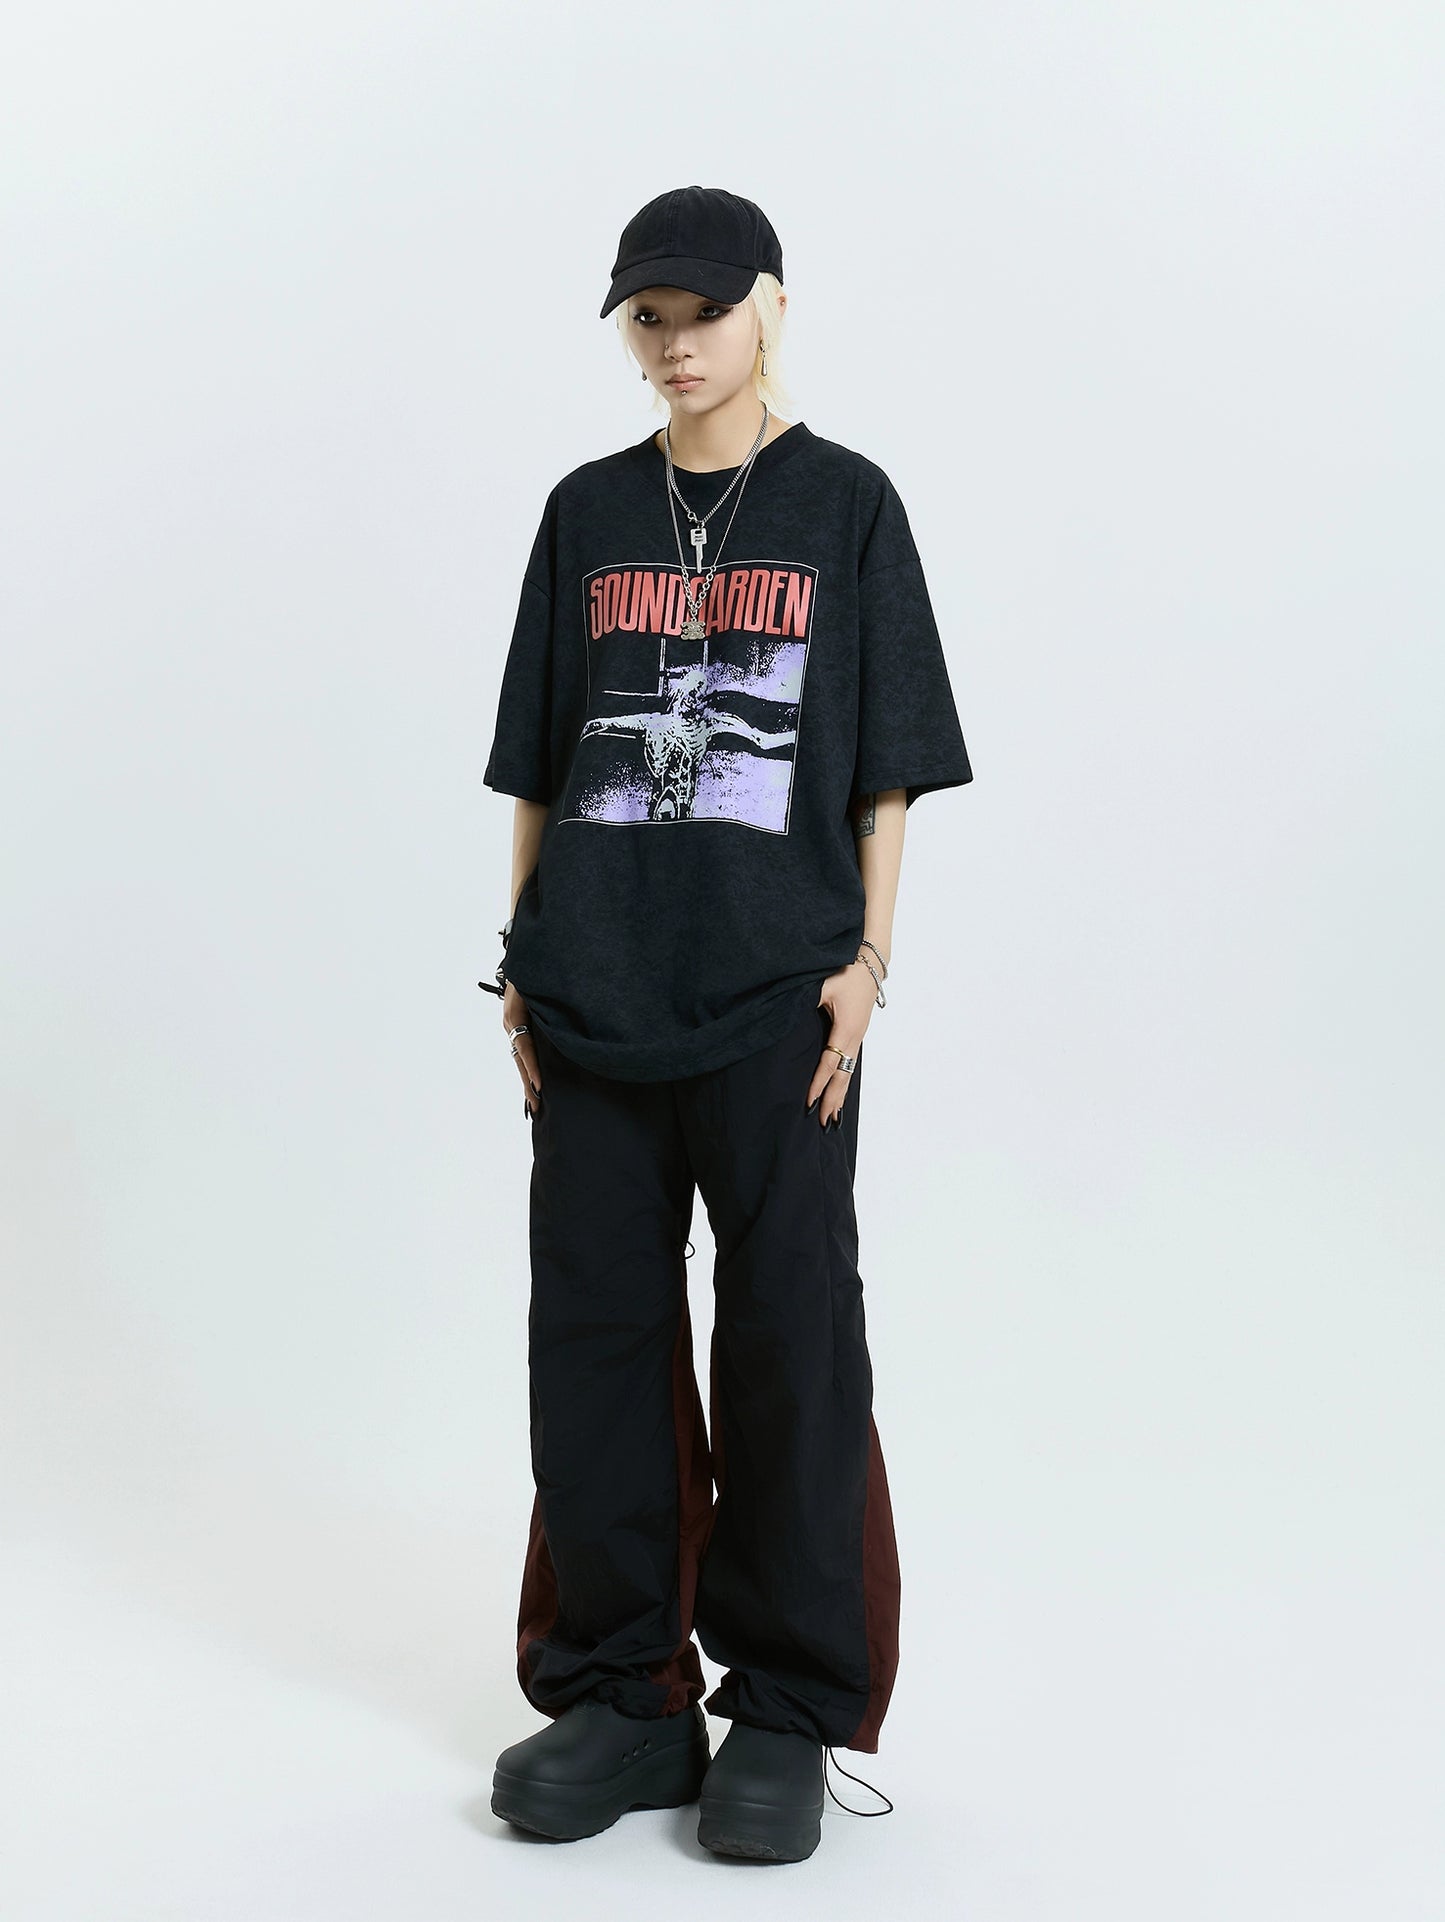 MICHINNYON thin, airy, wide-leg drawstring pockets with panels of contrasting quick-drying track cargo pants